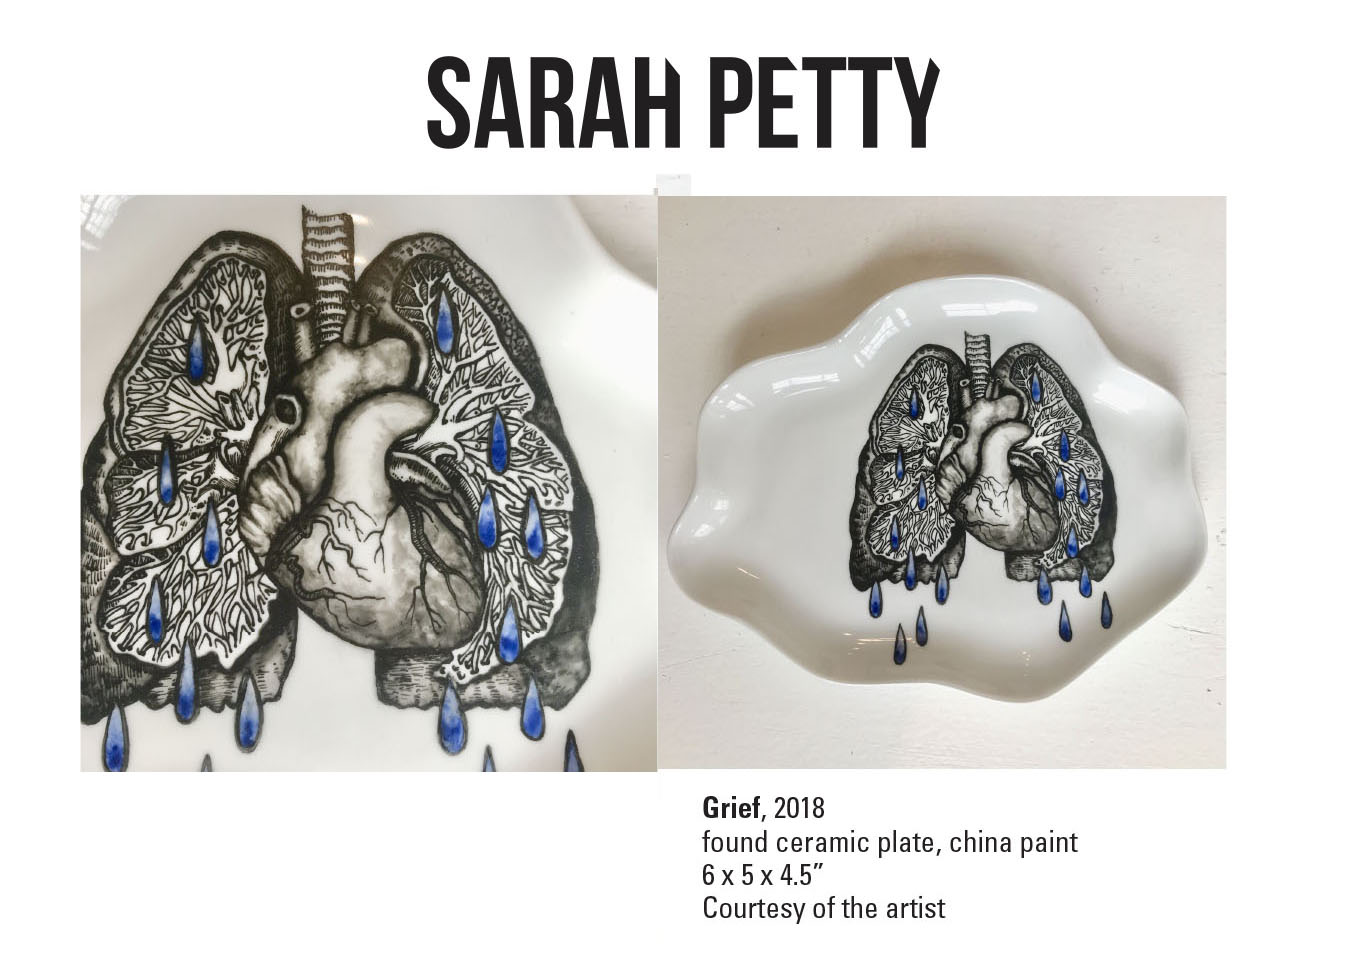 Sarah Petty, Grief, 2018. Found ceramic plate, china paint. 6 x 5 x 4.5” Courtesy of the artist. A ceramic plate with painted lungs and heart dropping blue drops.